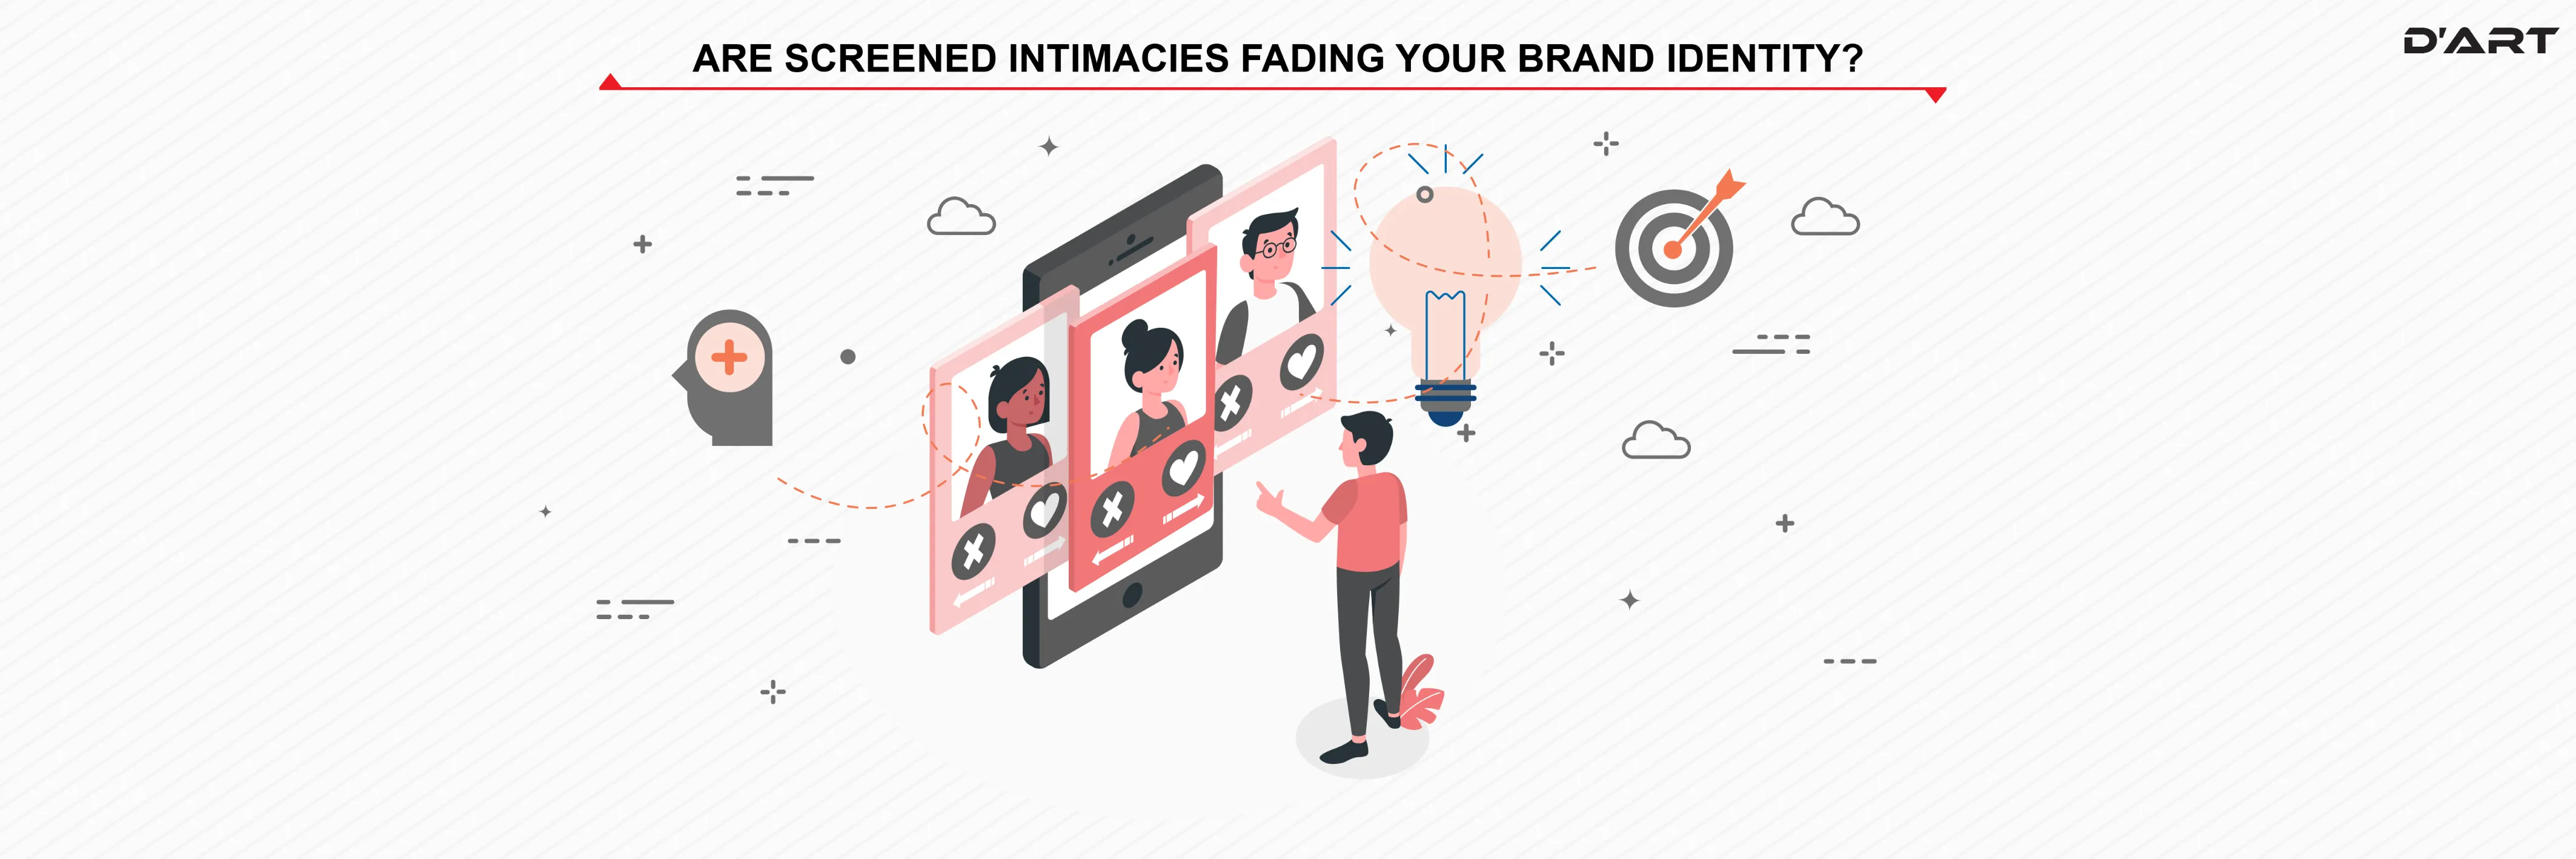 Are screened intimacies fading your brand identity?